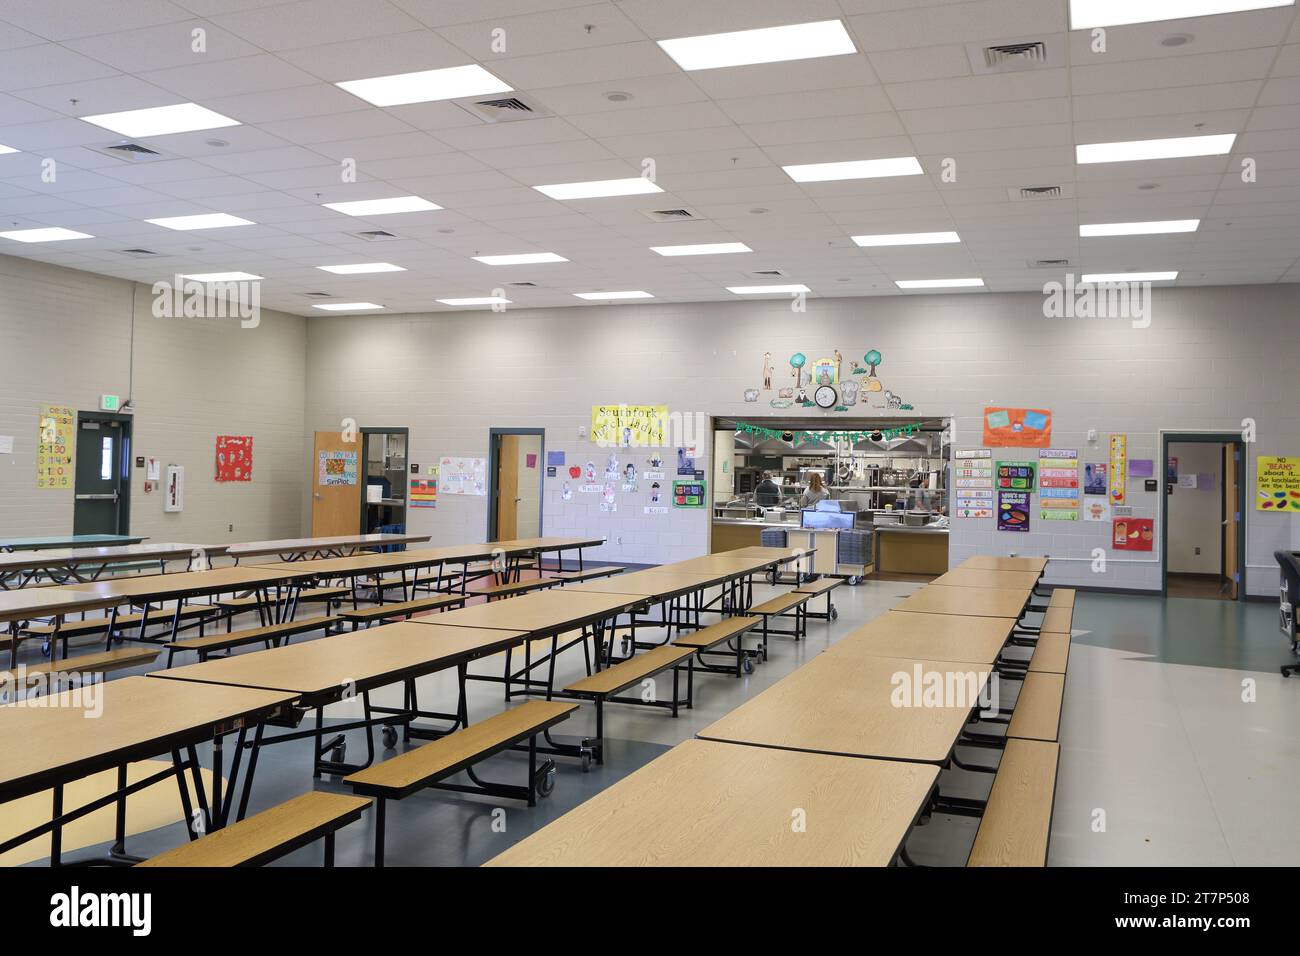 The lunch room in an elementary school. Stock Photo